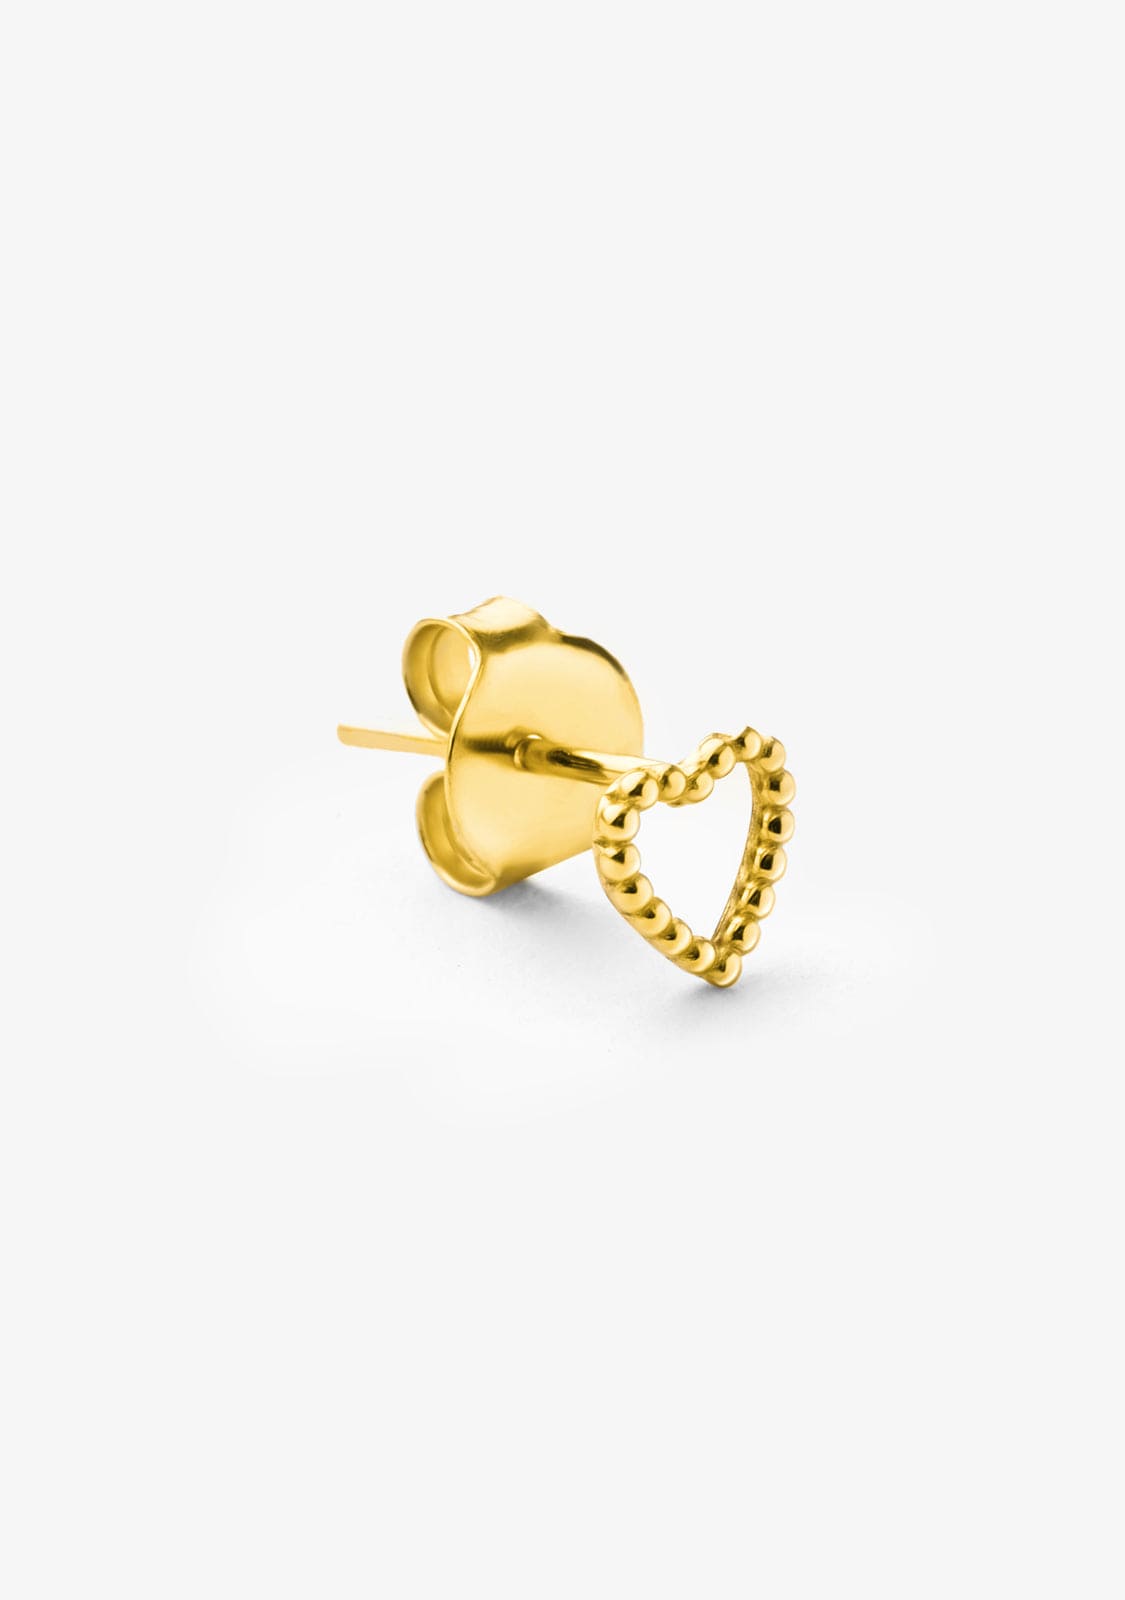 Piercing Cuore Gold